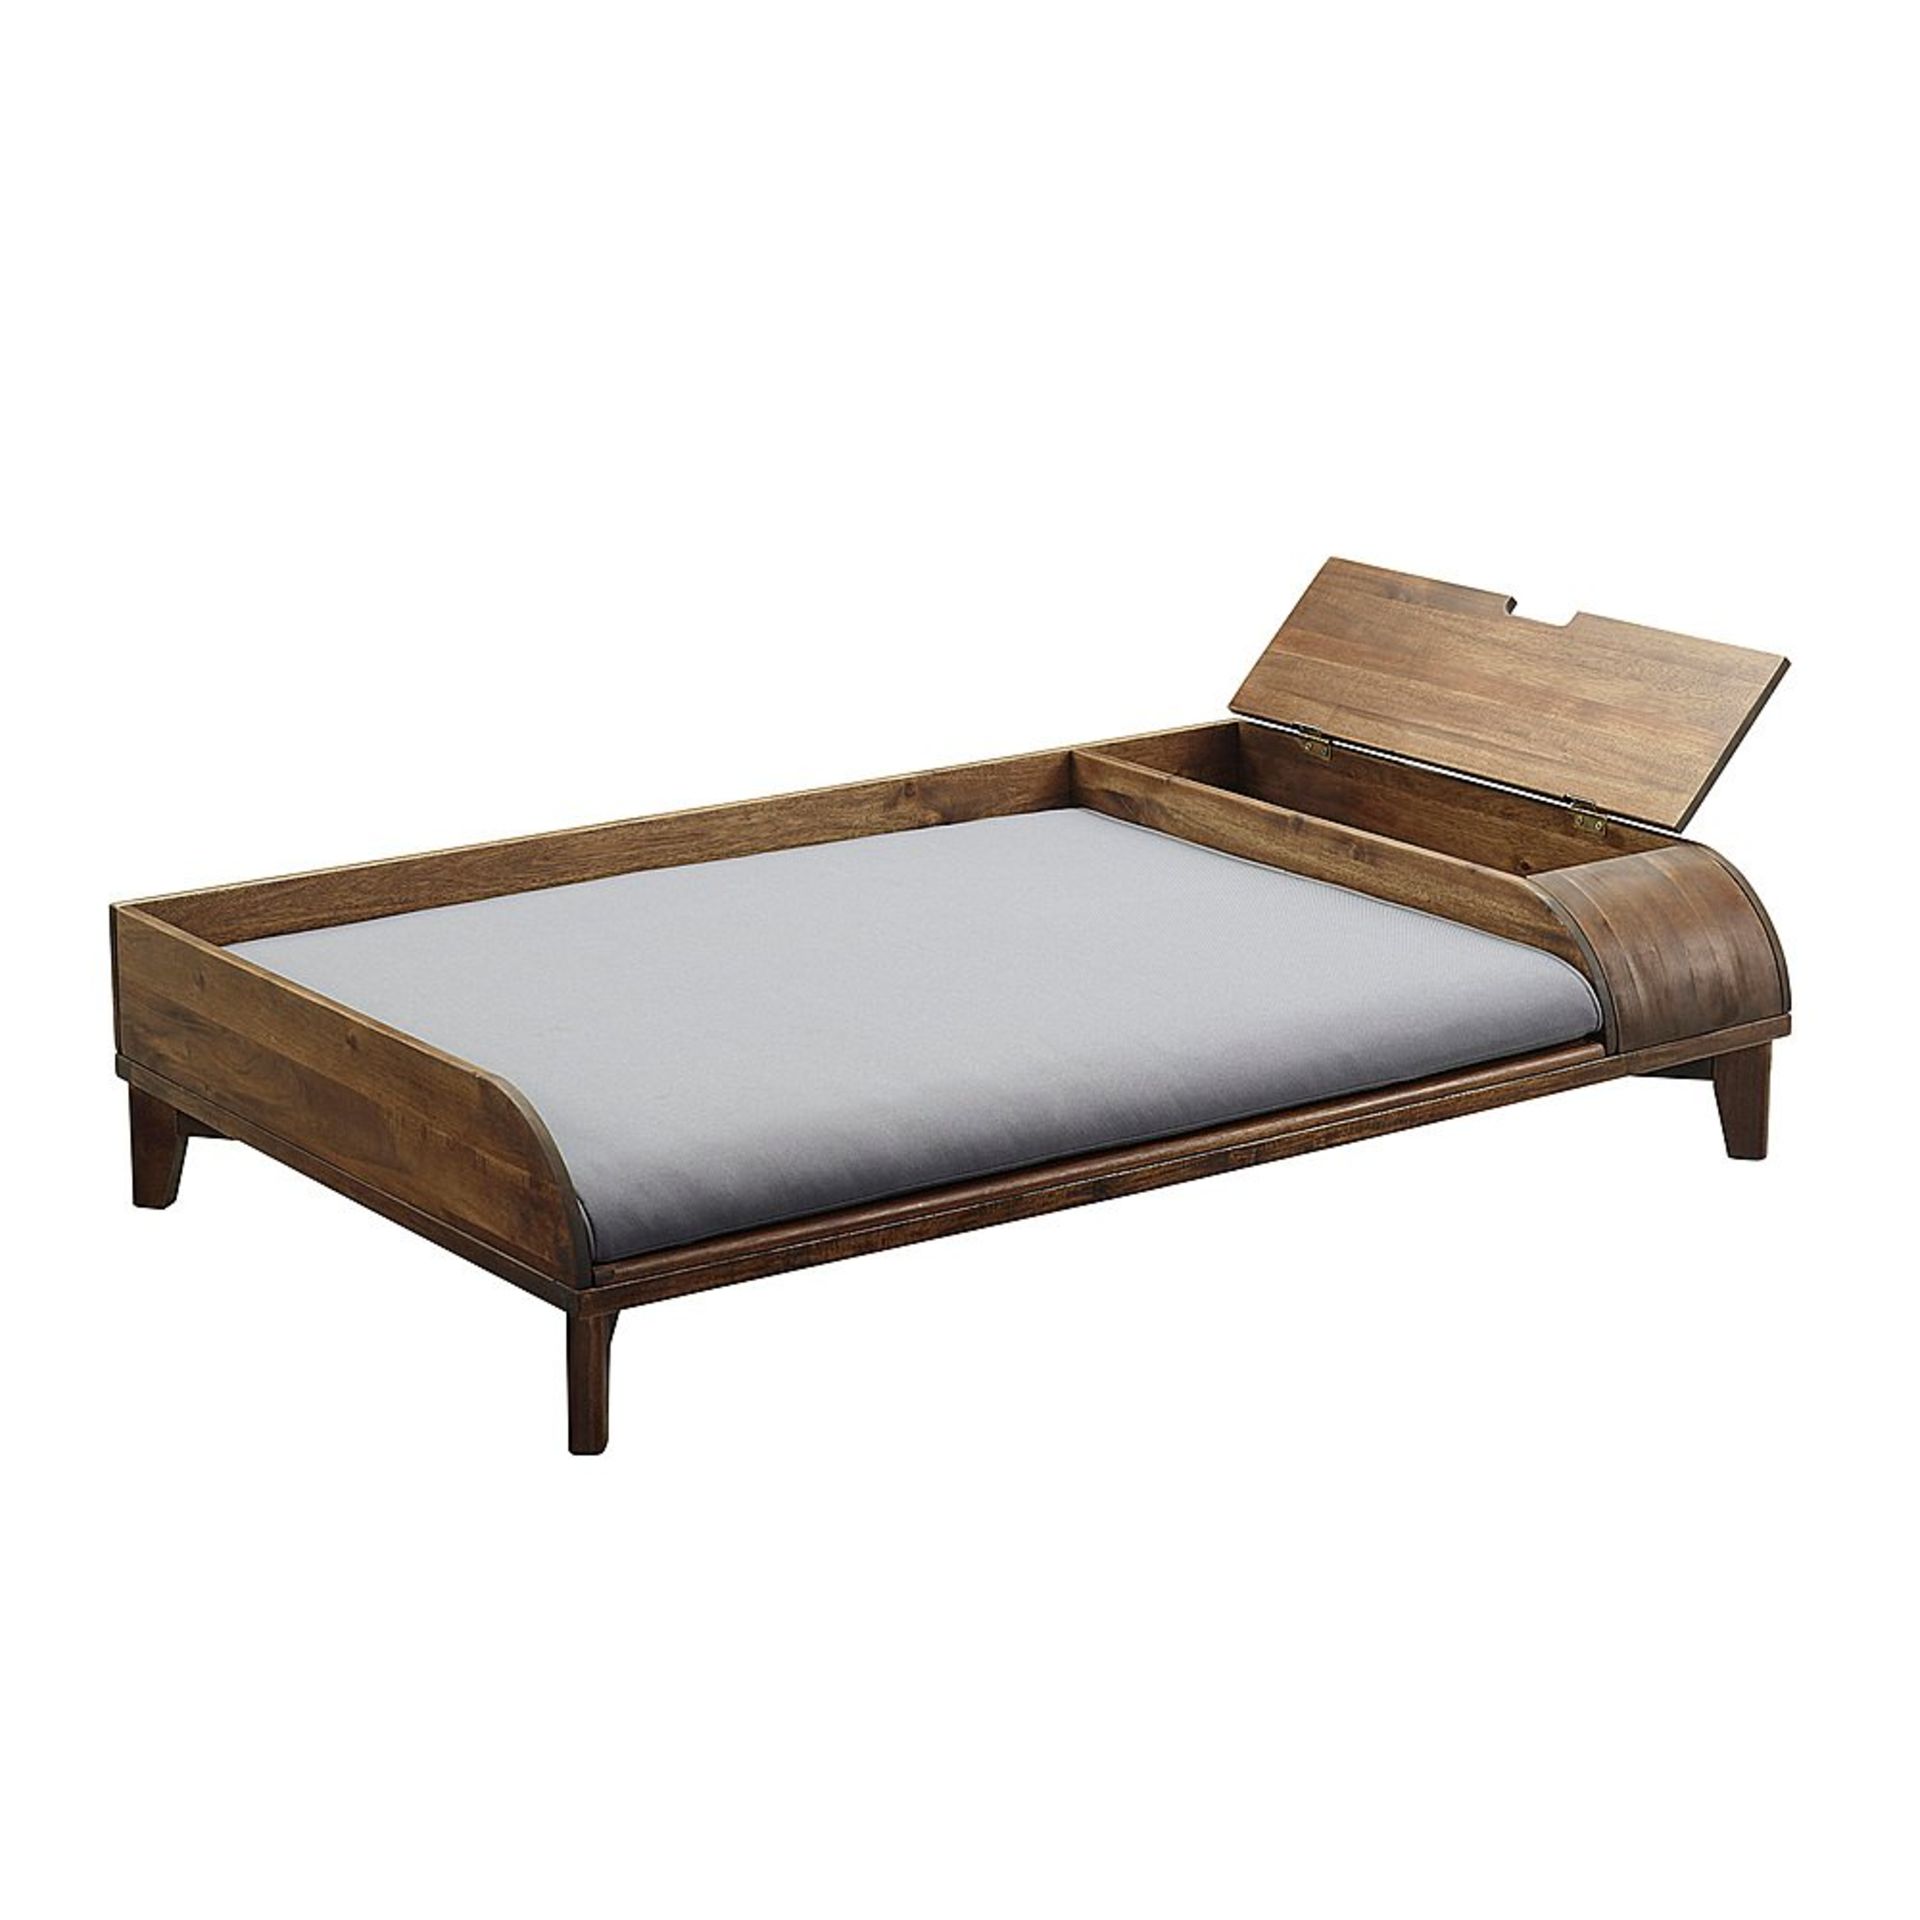 A1 PRODUCT NEW - SOLID WOOD STORAGE PED BED WITH CUSHION IN DARK BROWN/GREY - RRP Ã‚Â£245 - Image 4 of 7